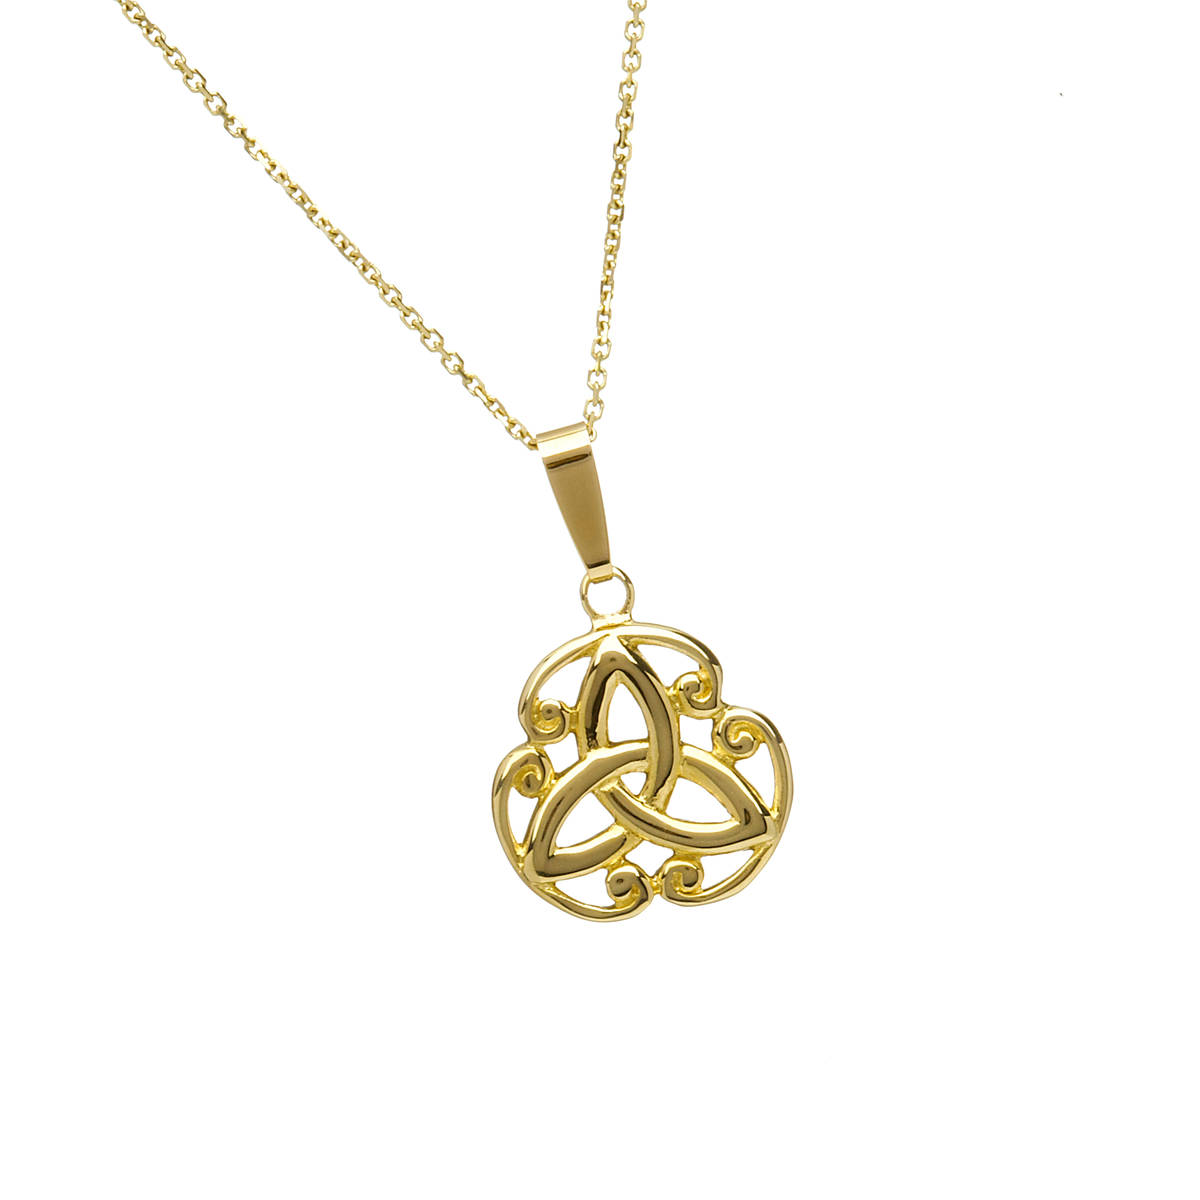 10ct Yellow Gold Trinity Knot Pendant On 18" Chain